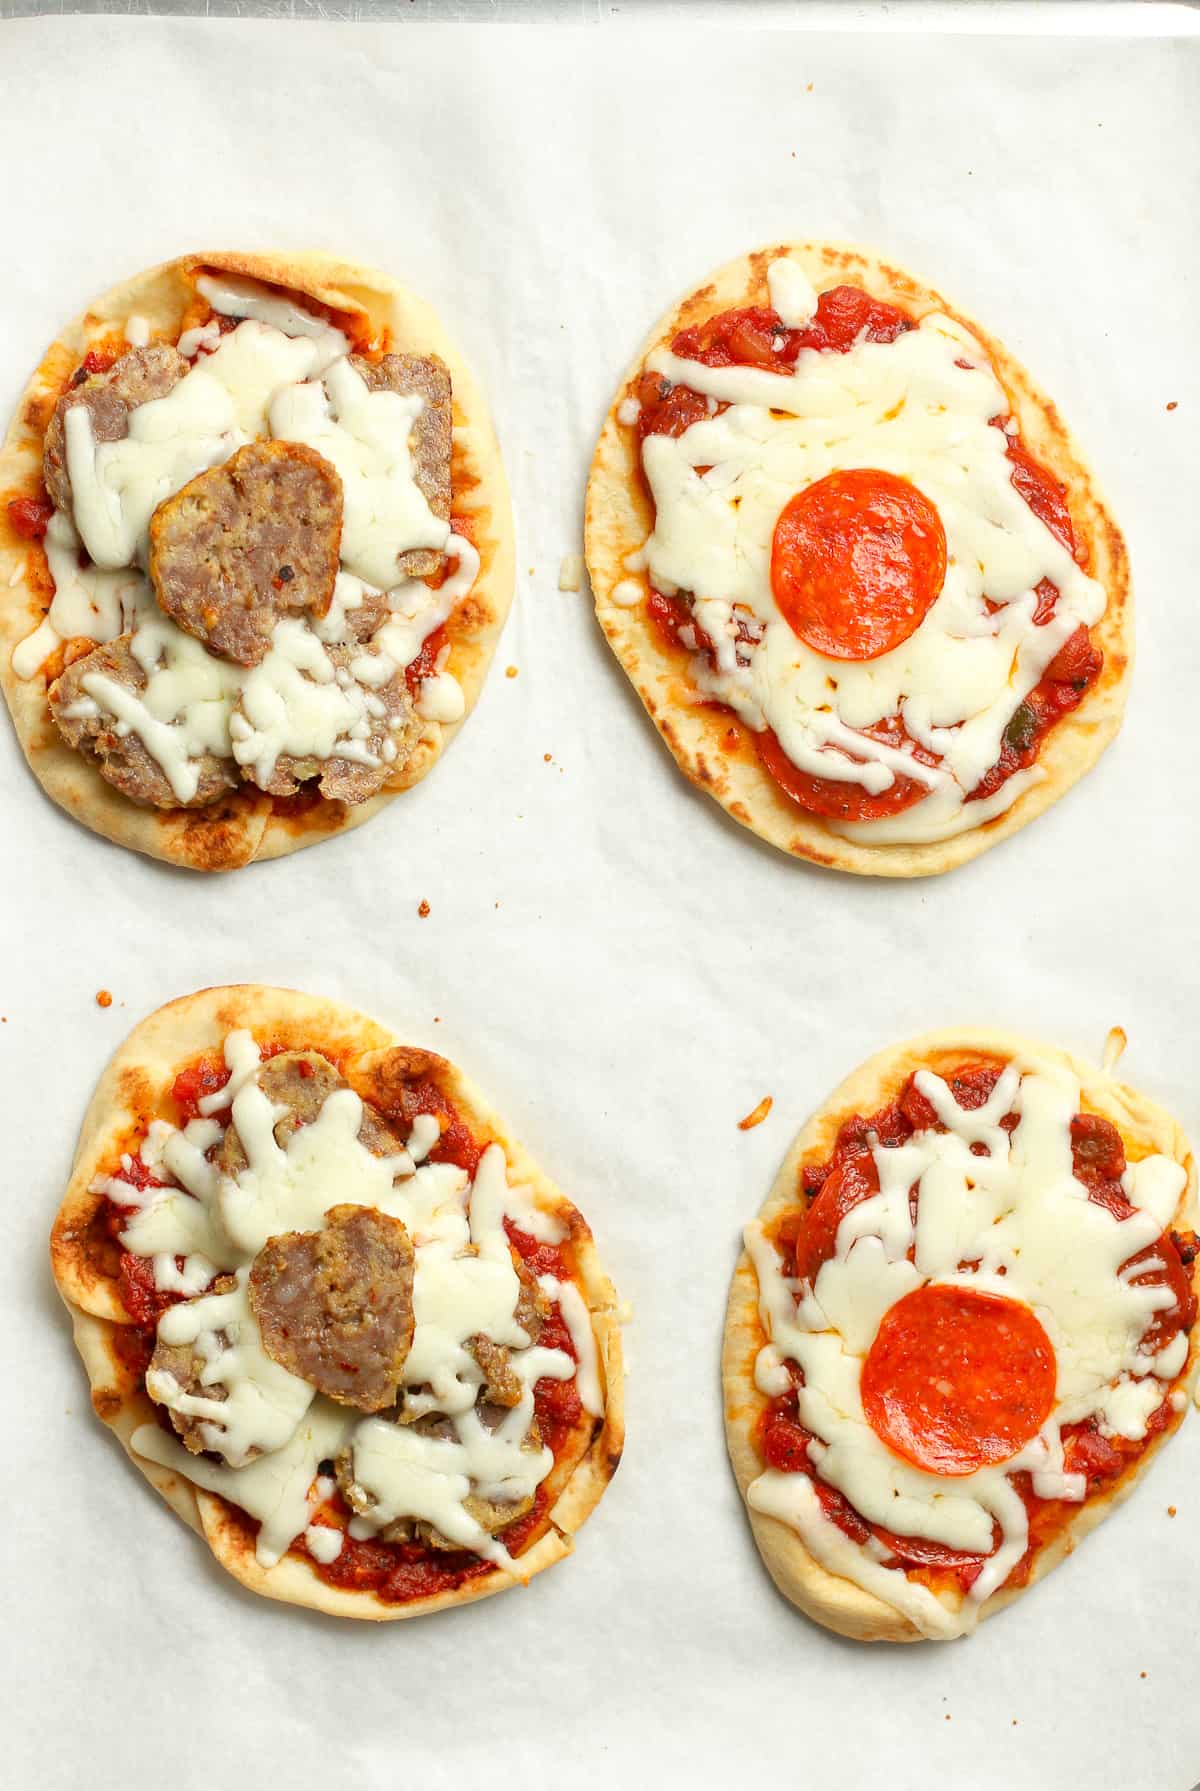 Baked naan bread pizza with sausage and pepperoni toppings.